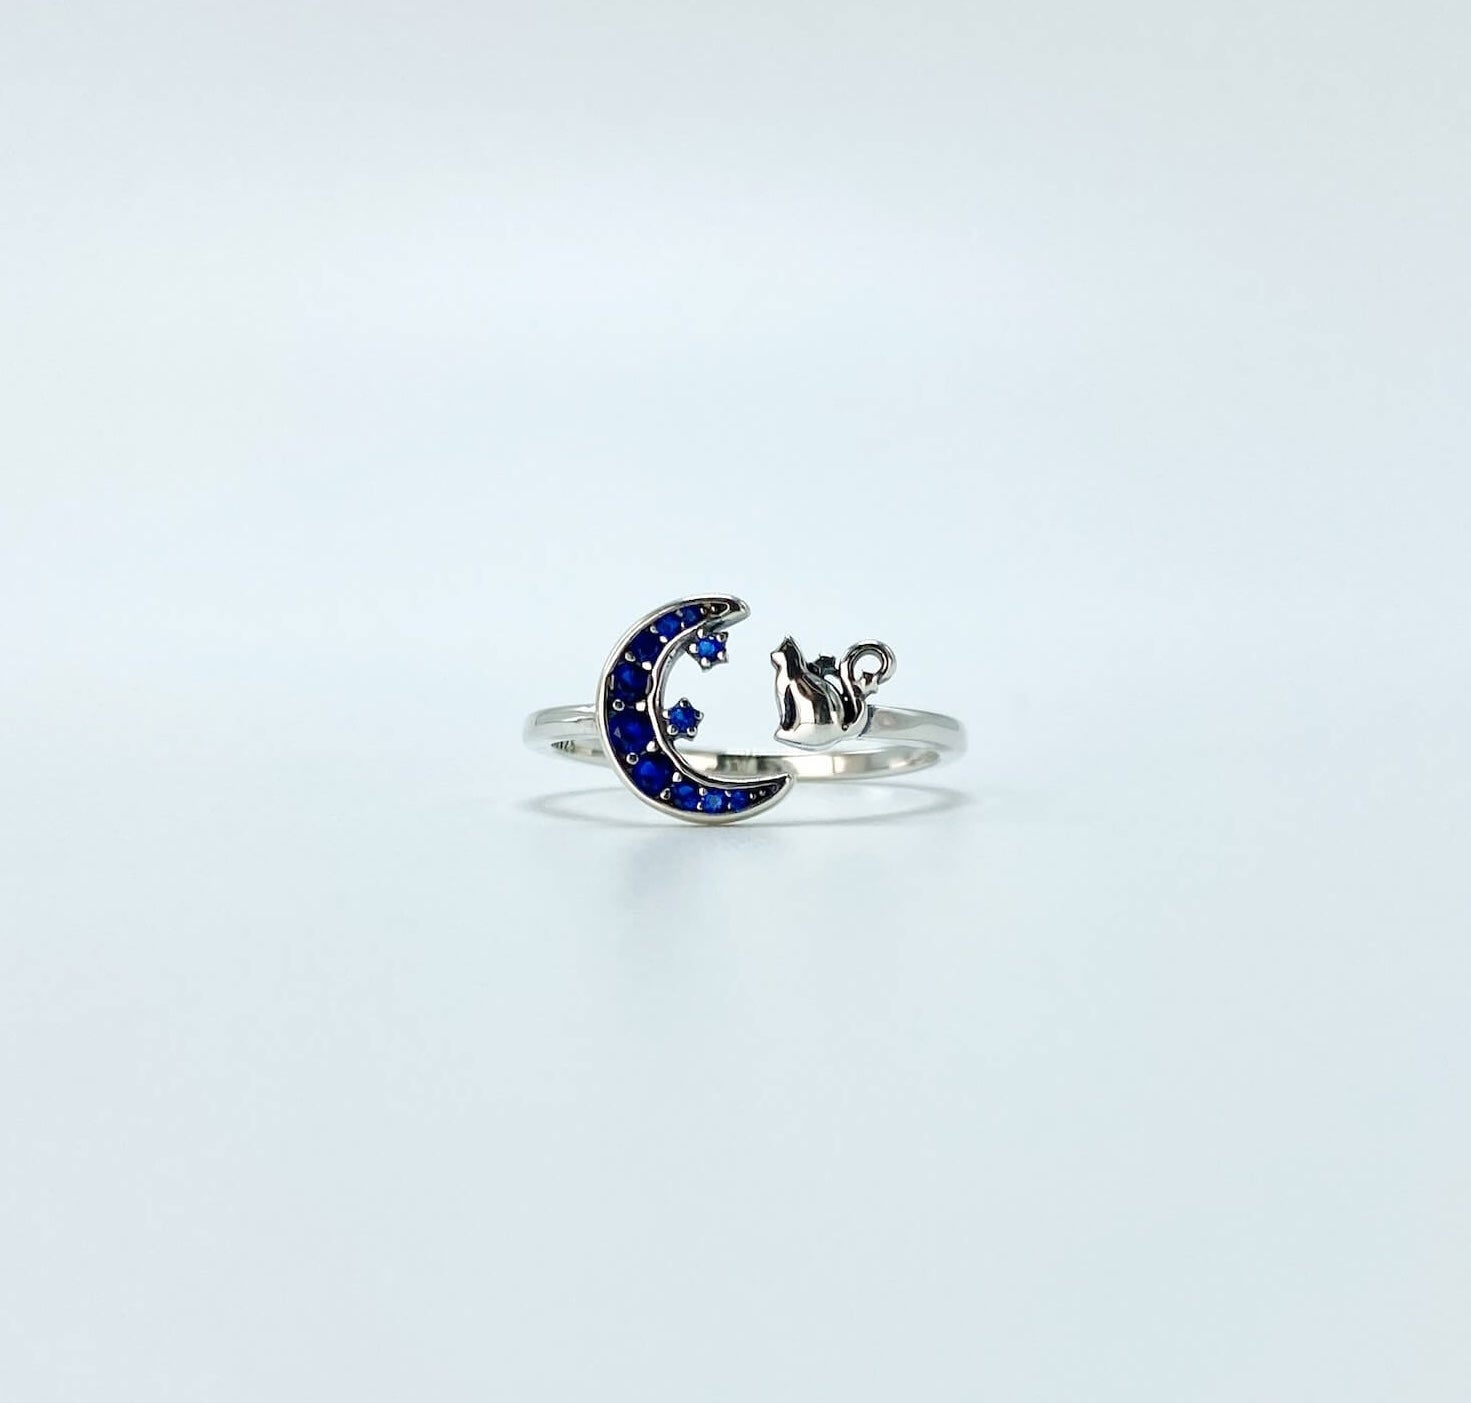 Sterling silver cat and moon ring with blue cubic zirconia gemstones in a pave setting.